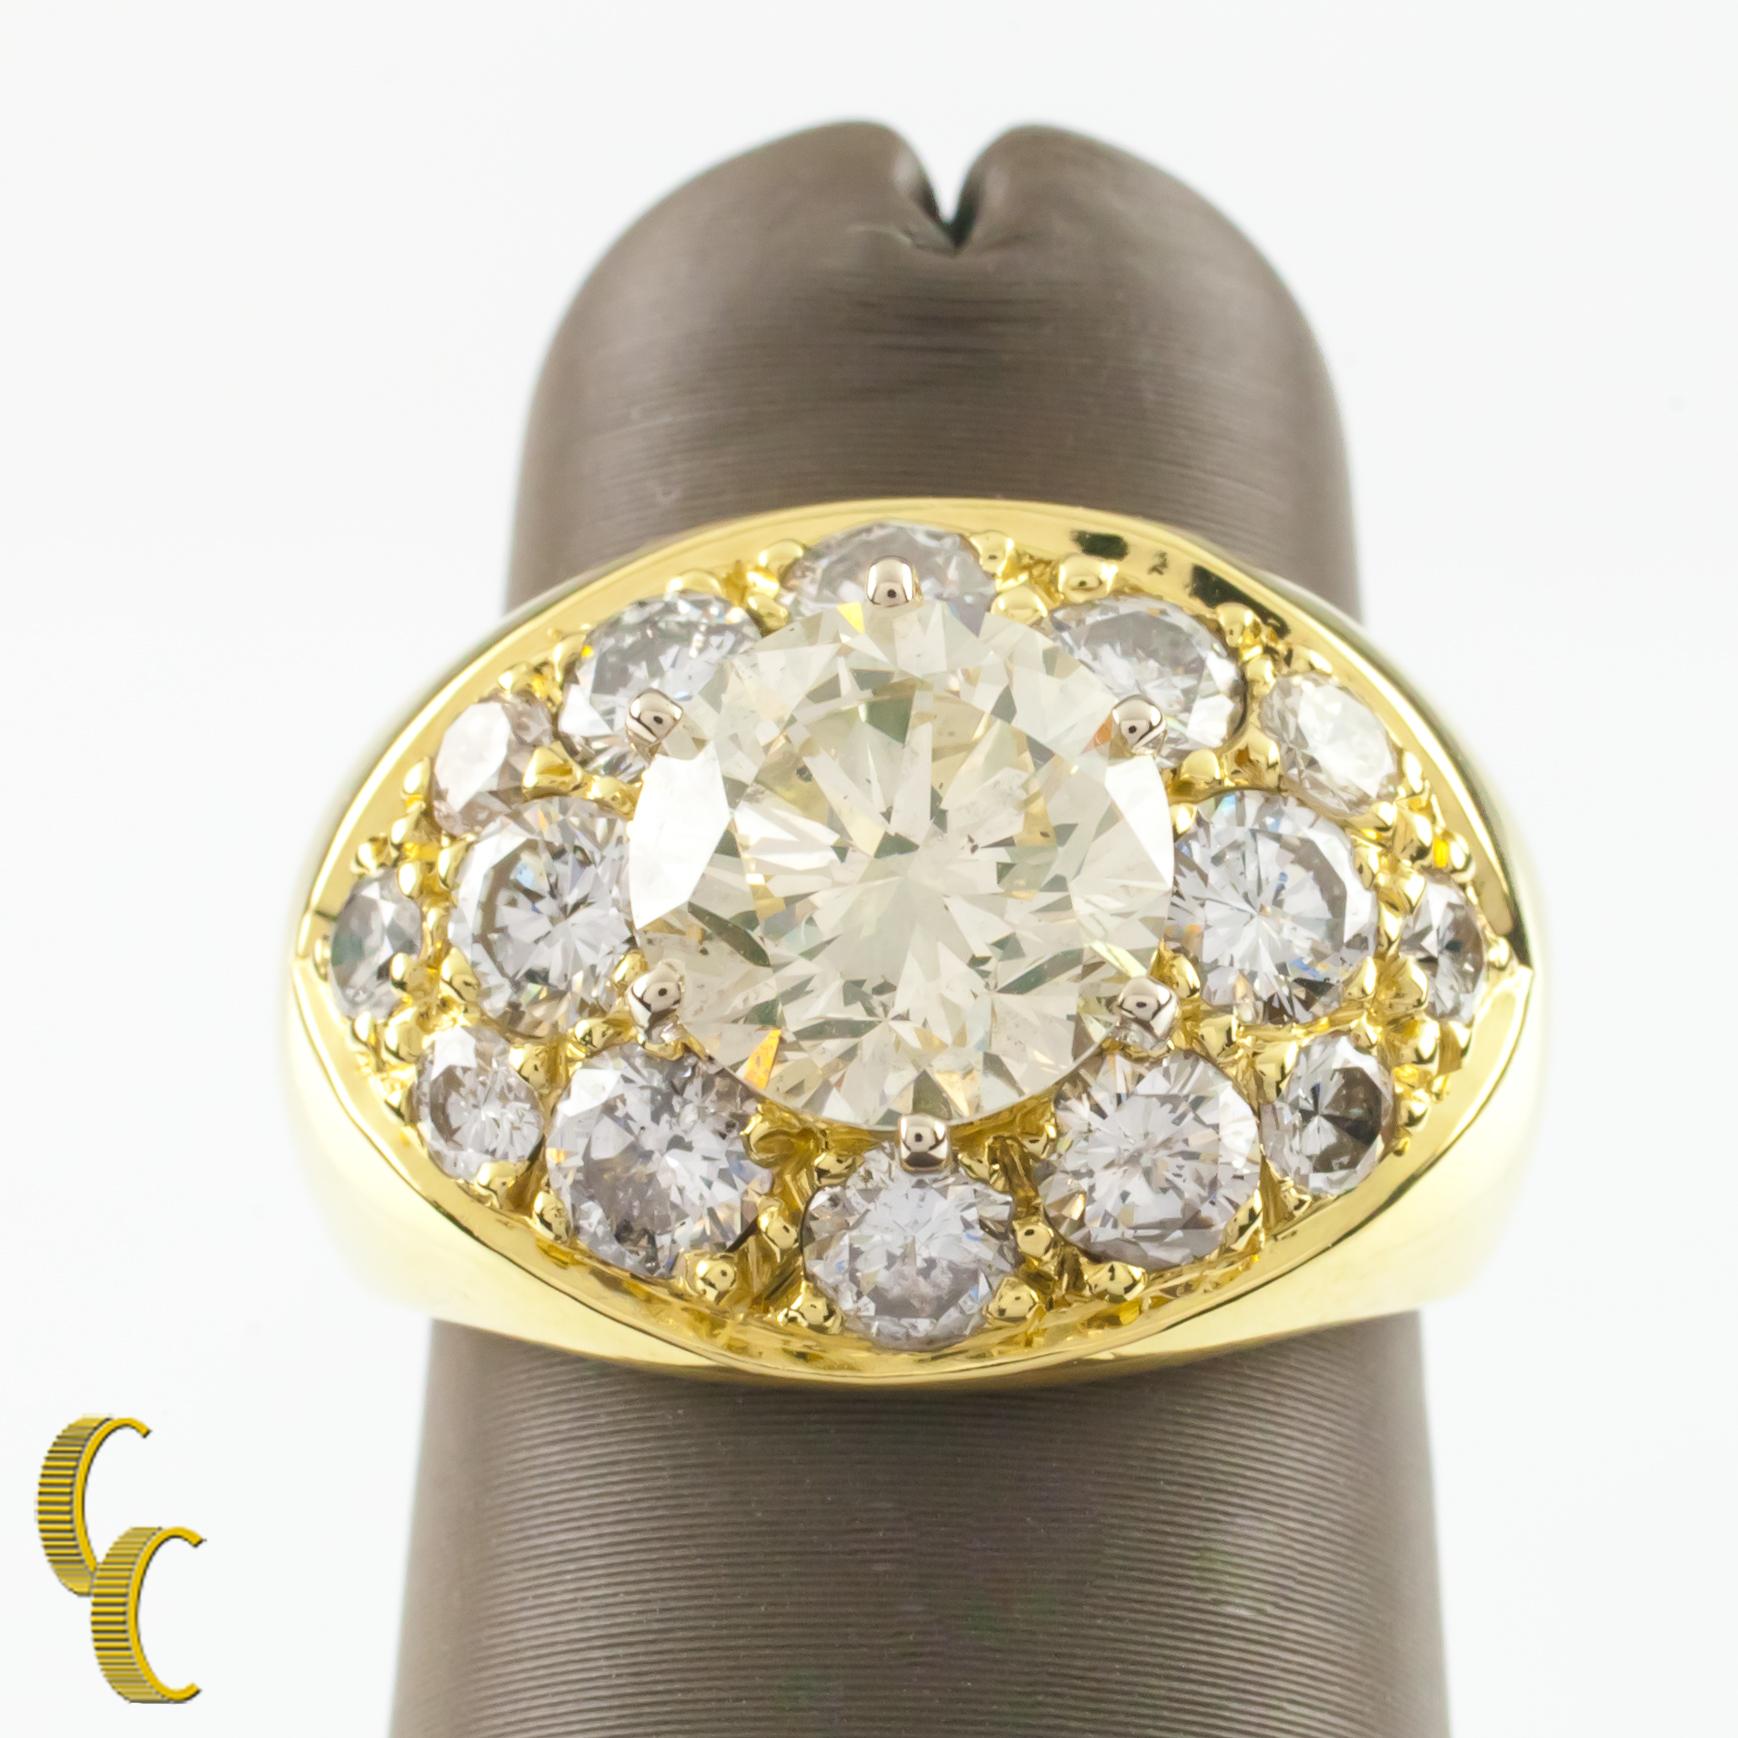 4.82 Carat Round Brilliant Diamond 18 Karat Yellow Gold Cocktail Ring In Excellent Condition For Sale In Sherman Oaks, CA